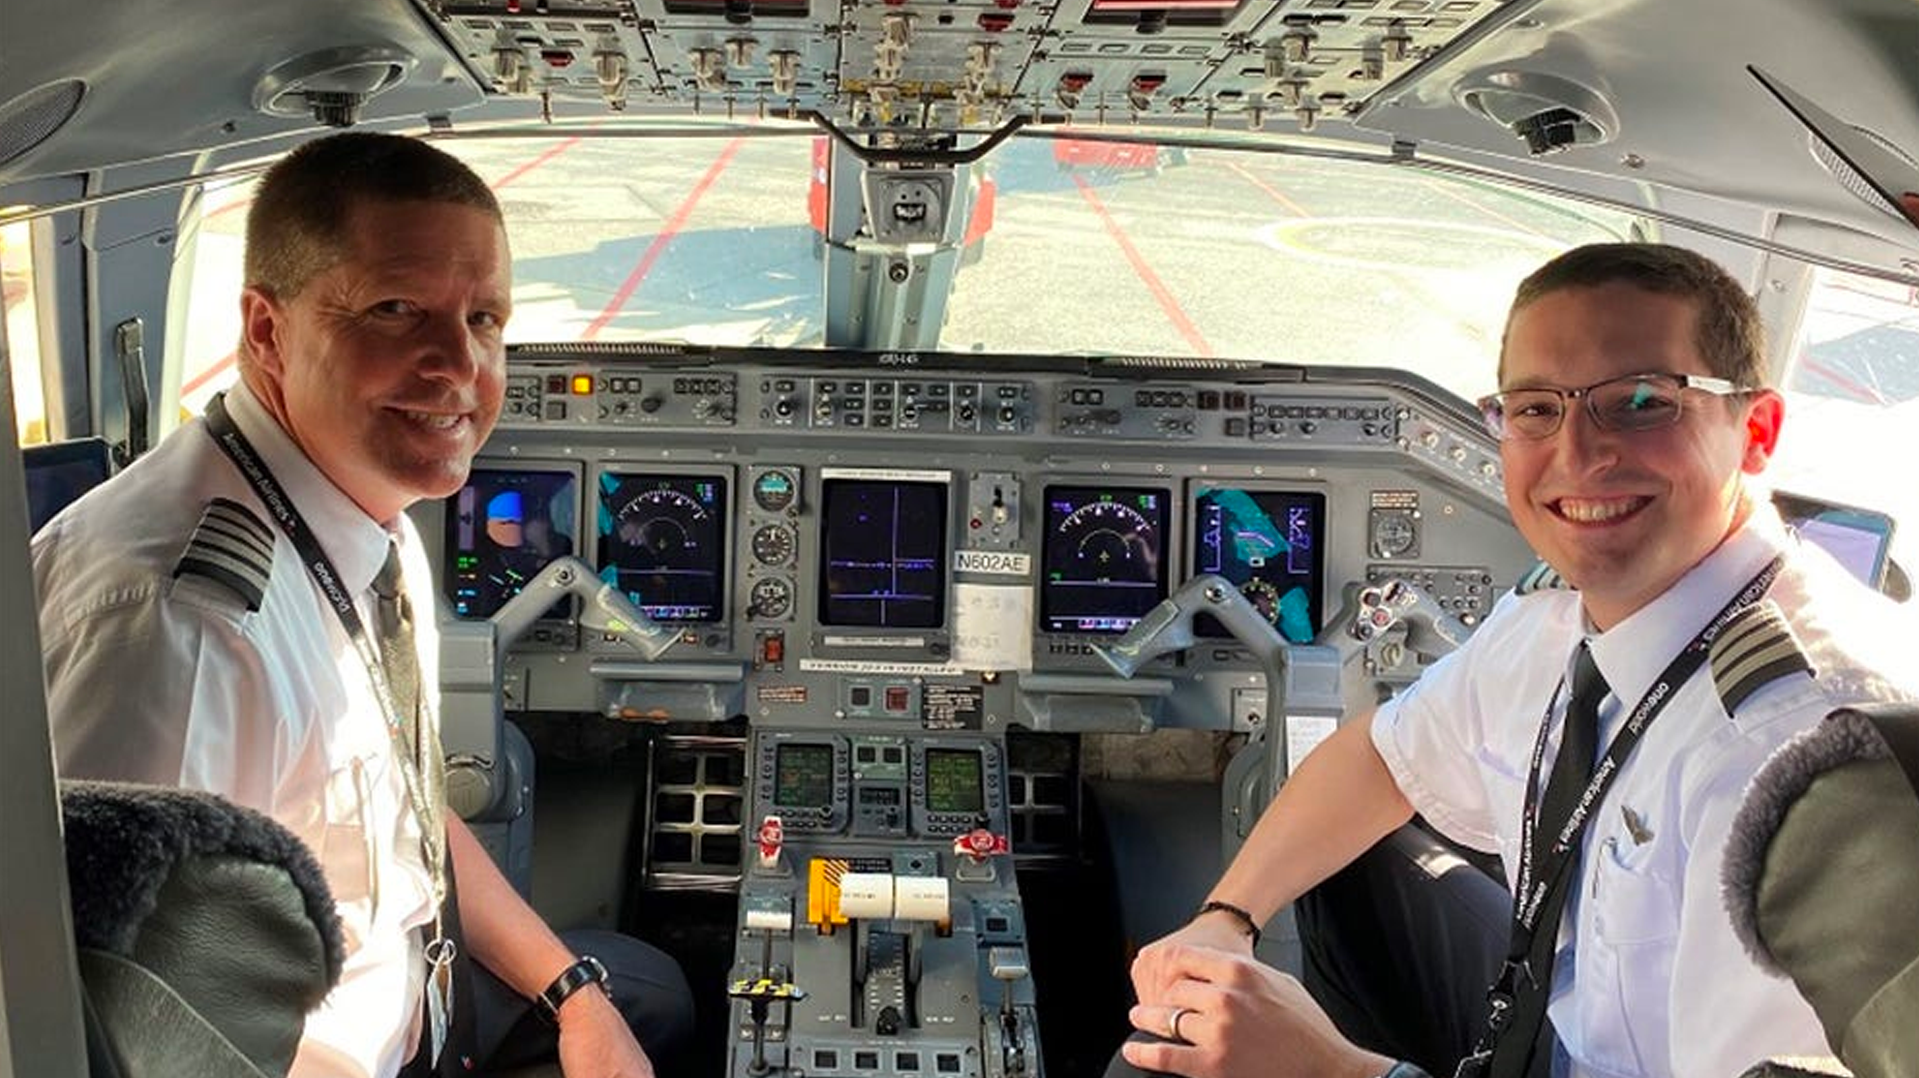 None of the US airlines are screening their pilots for cardiac issues, but they all say that safety is their top priority. They won't screen pilots because they know what they will find.